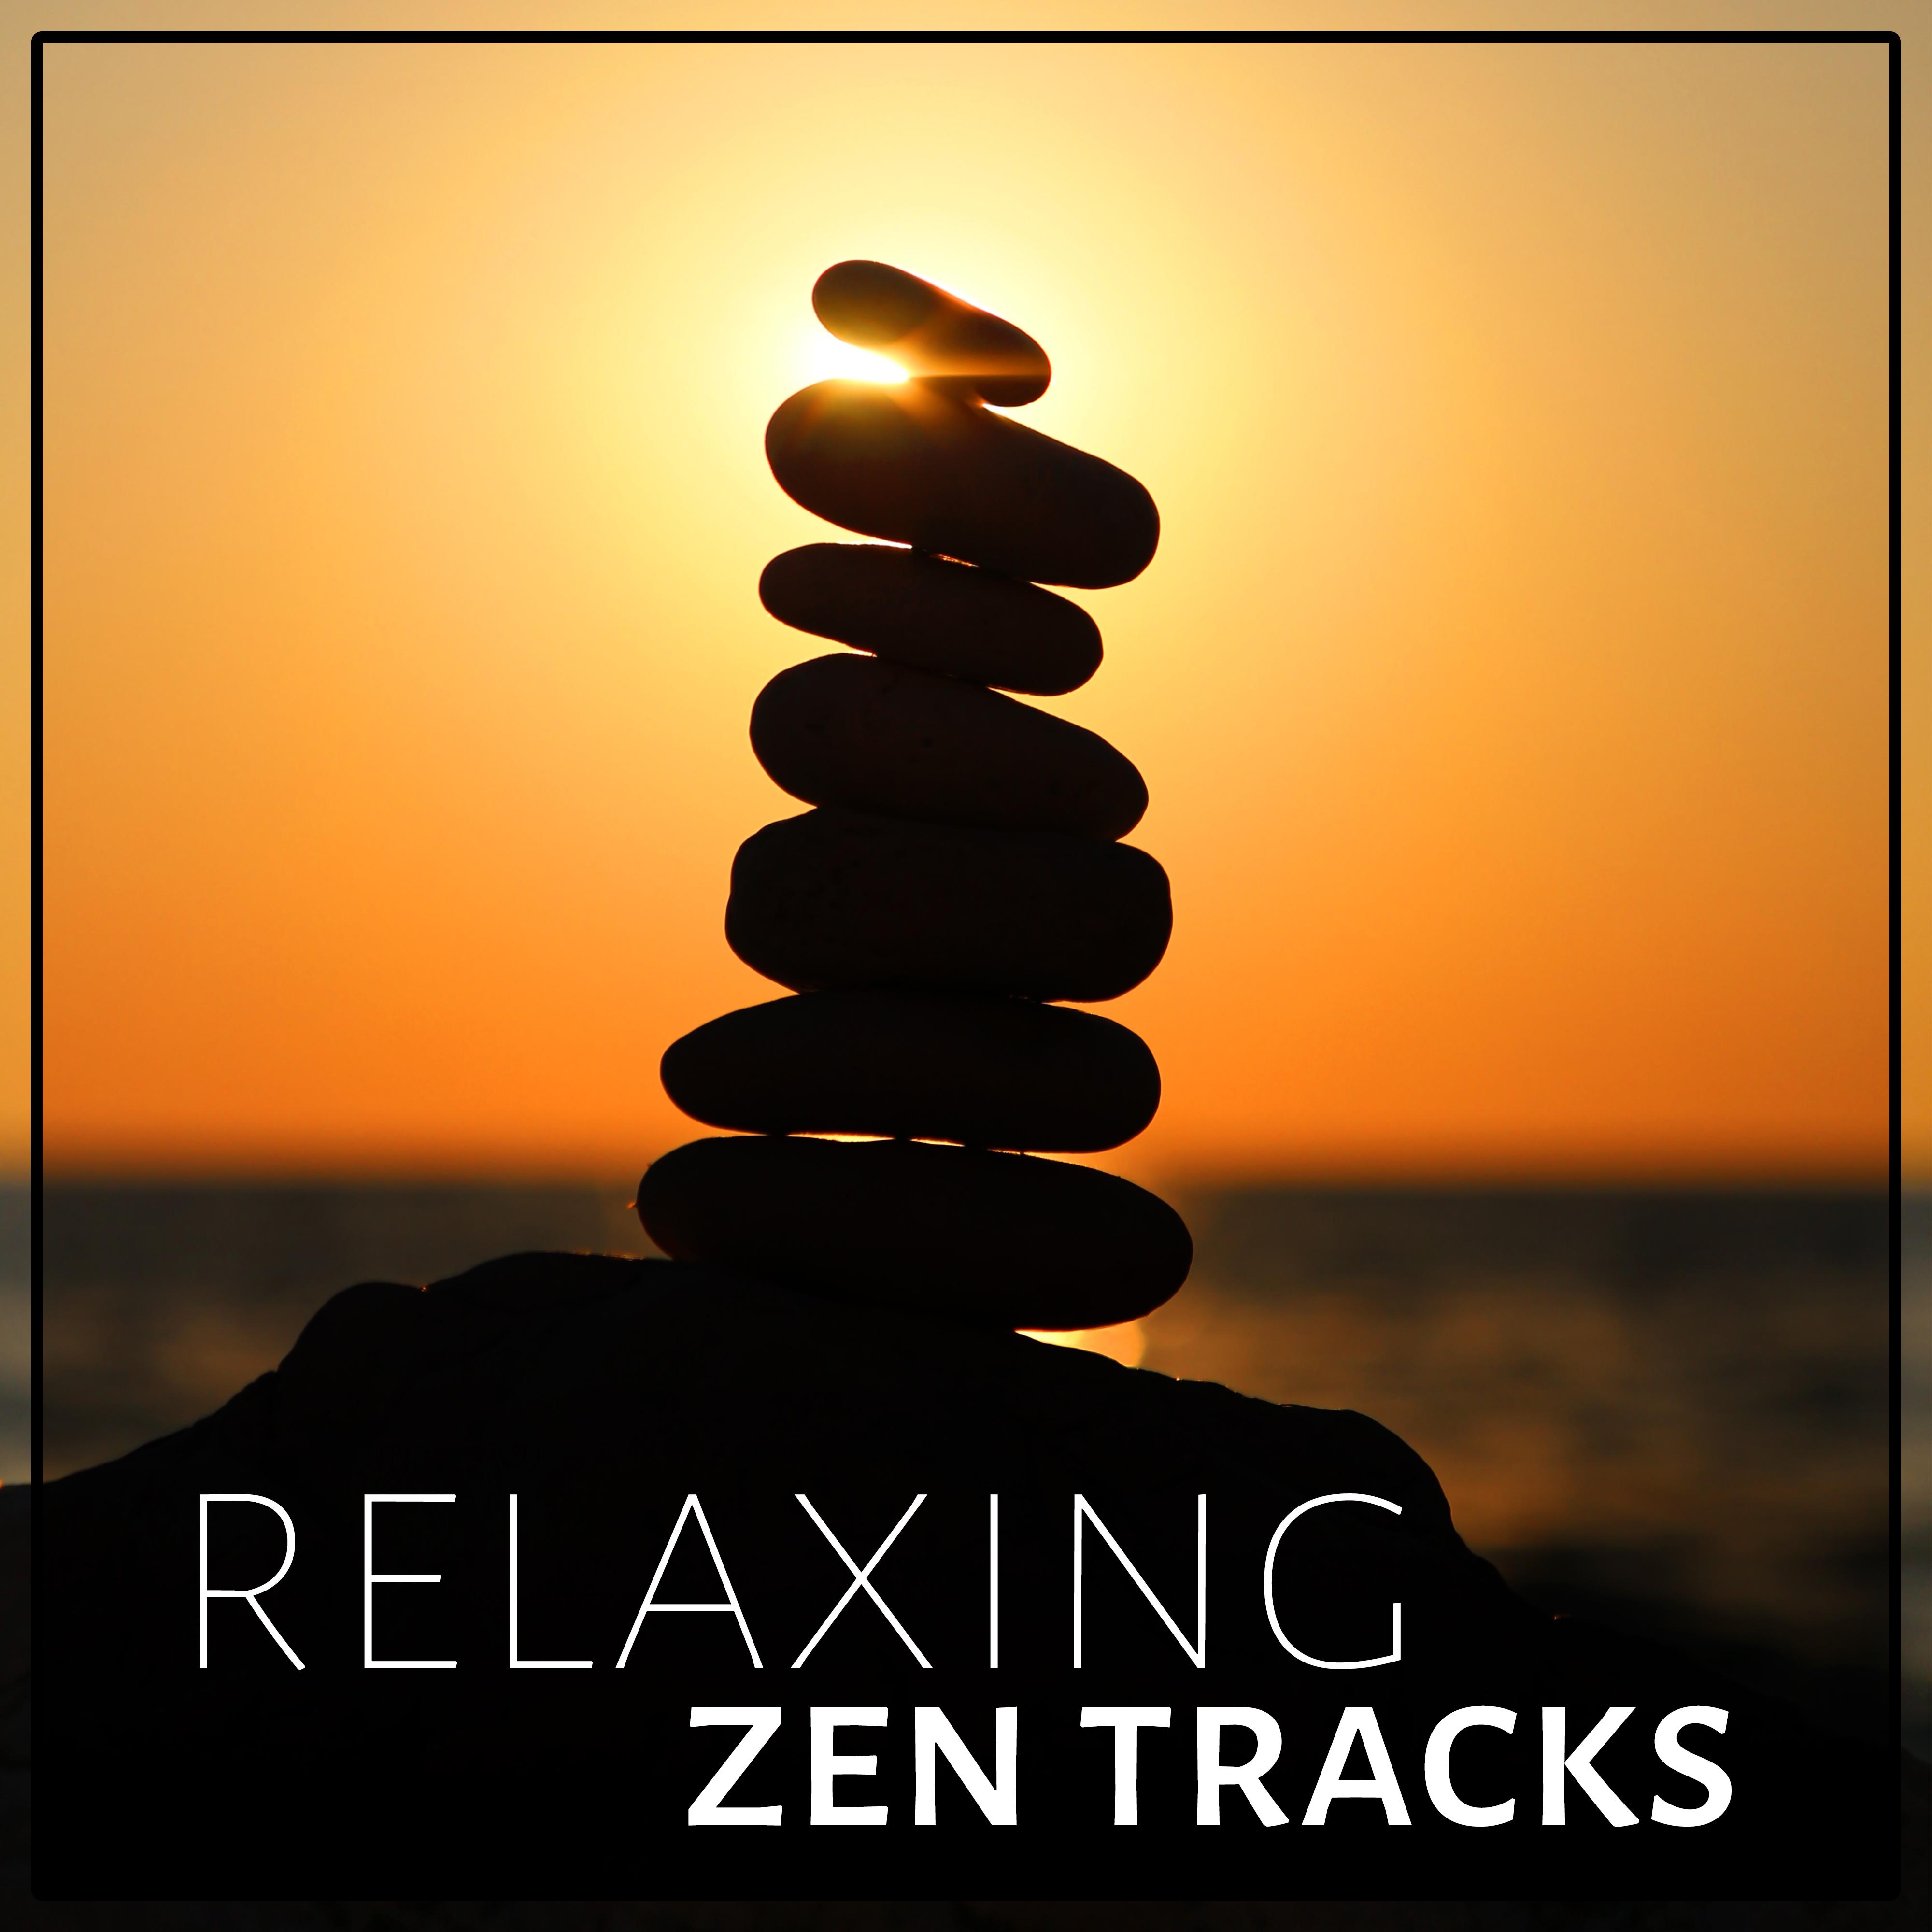 Relaxing Zen Tracks - Nature Sounds for Massage, Flute Music for Deep Relaxation and Sleep, Soft Background Piano for Study, Ocean Waves for Yoga and Meditation